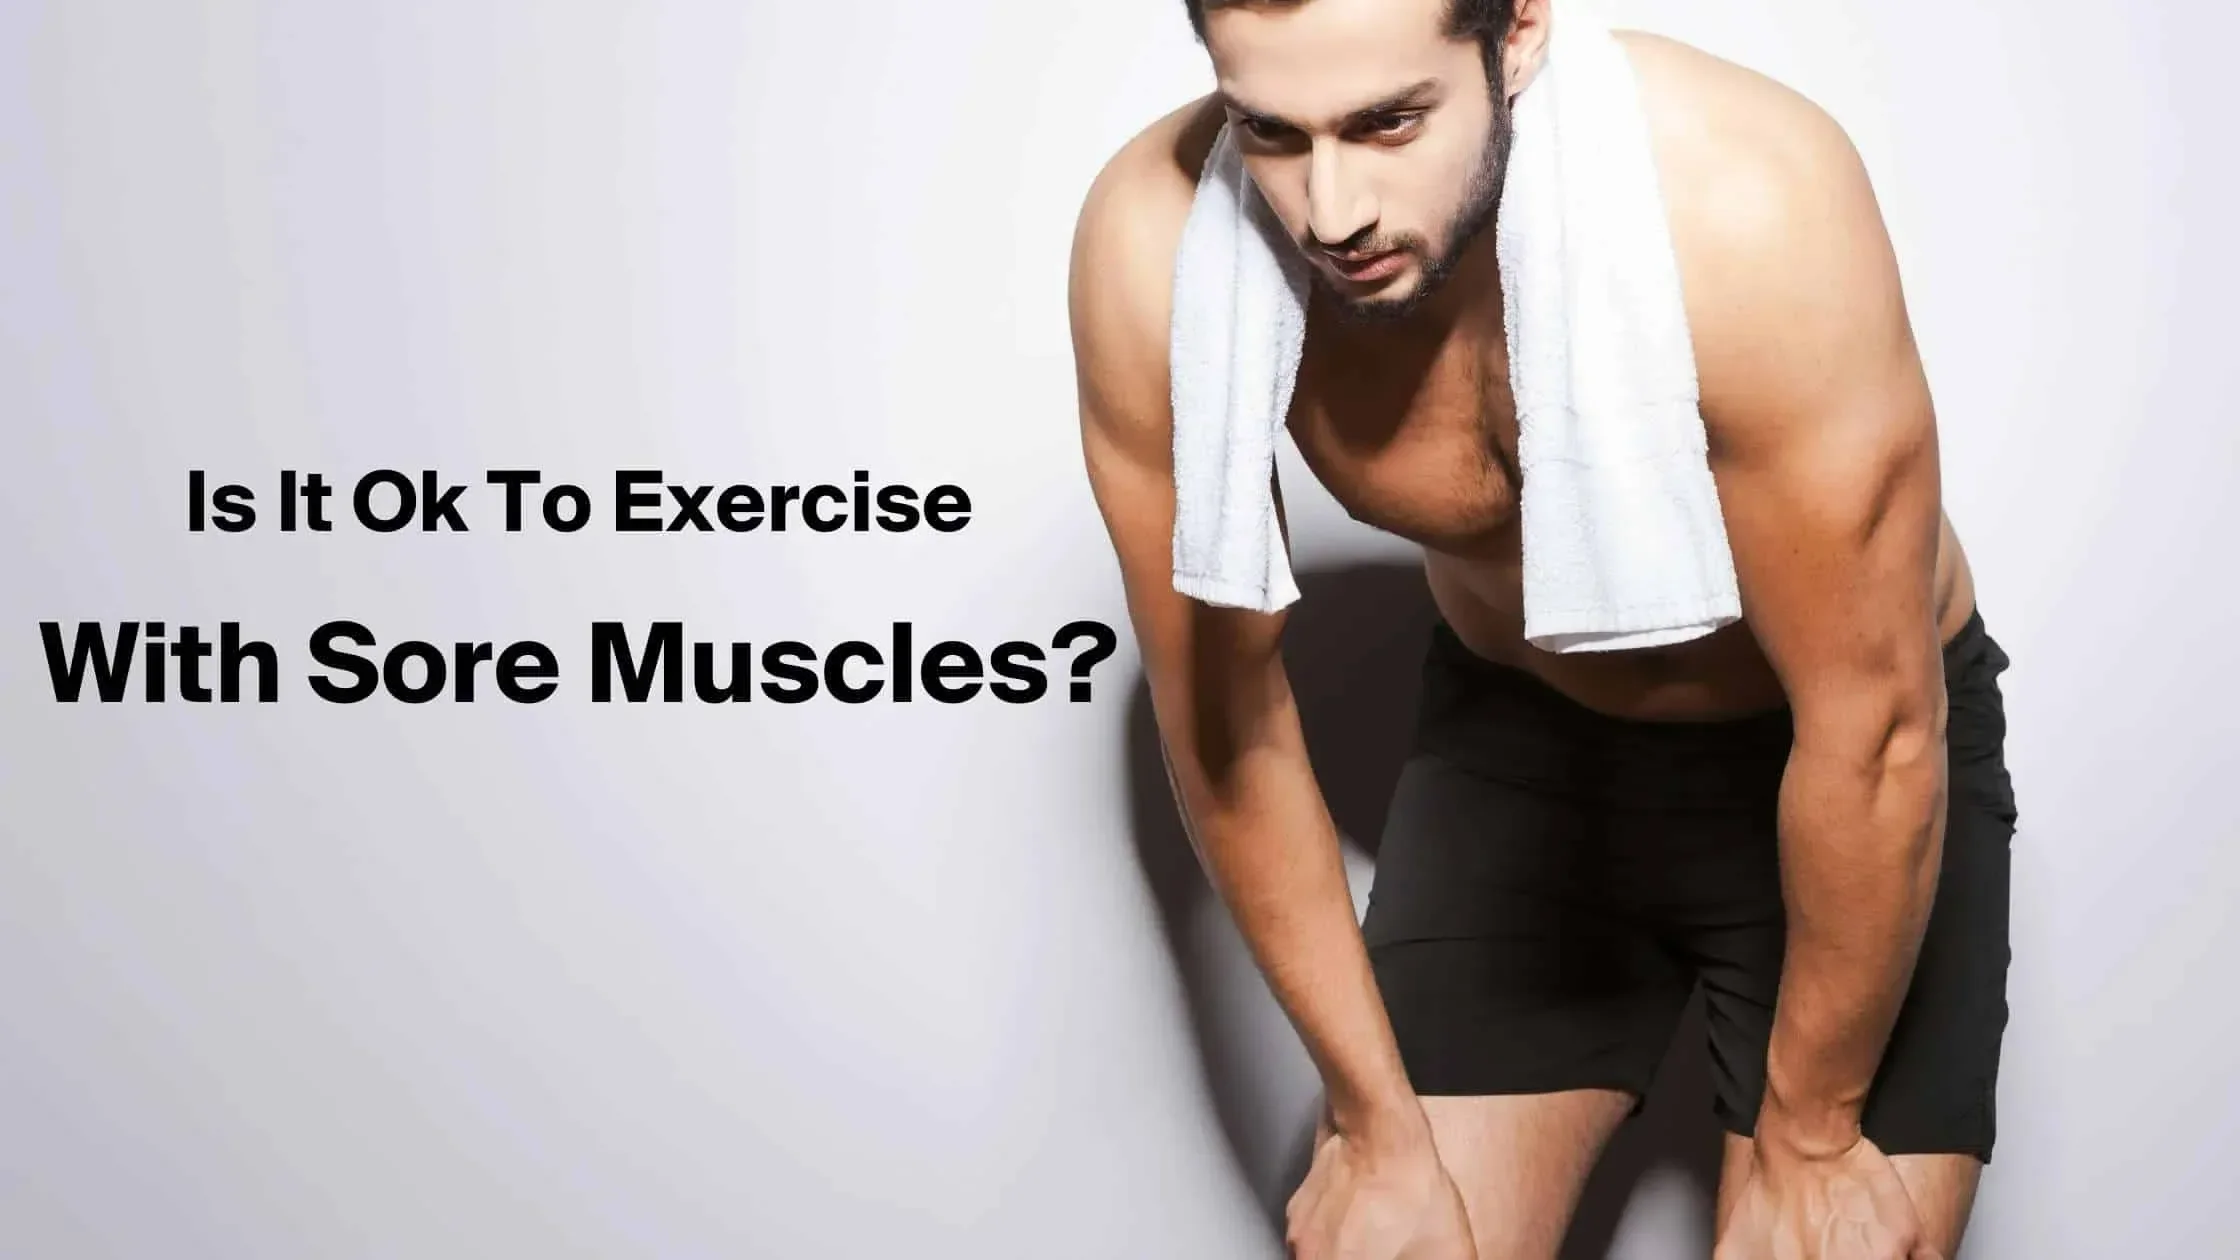 workout With Sore Muscles